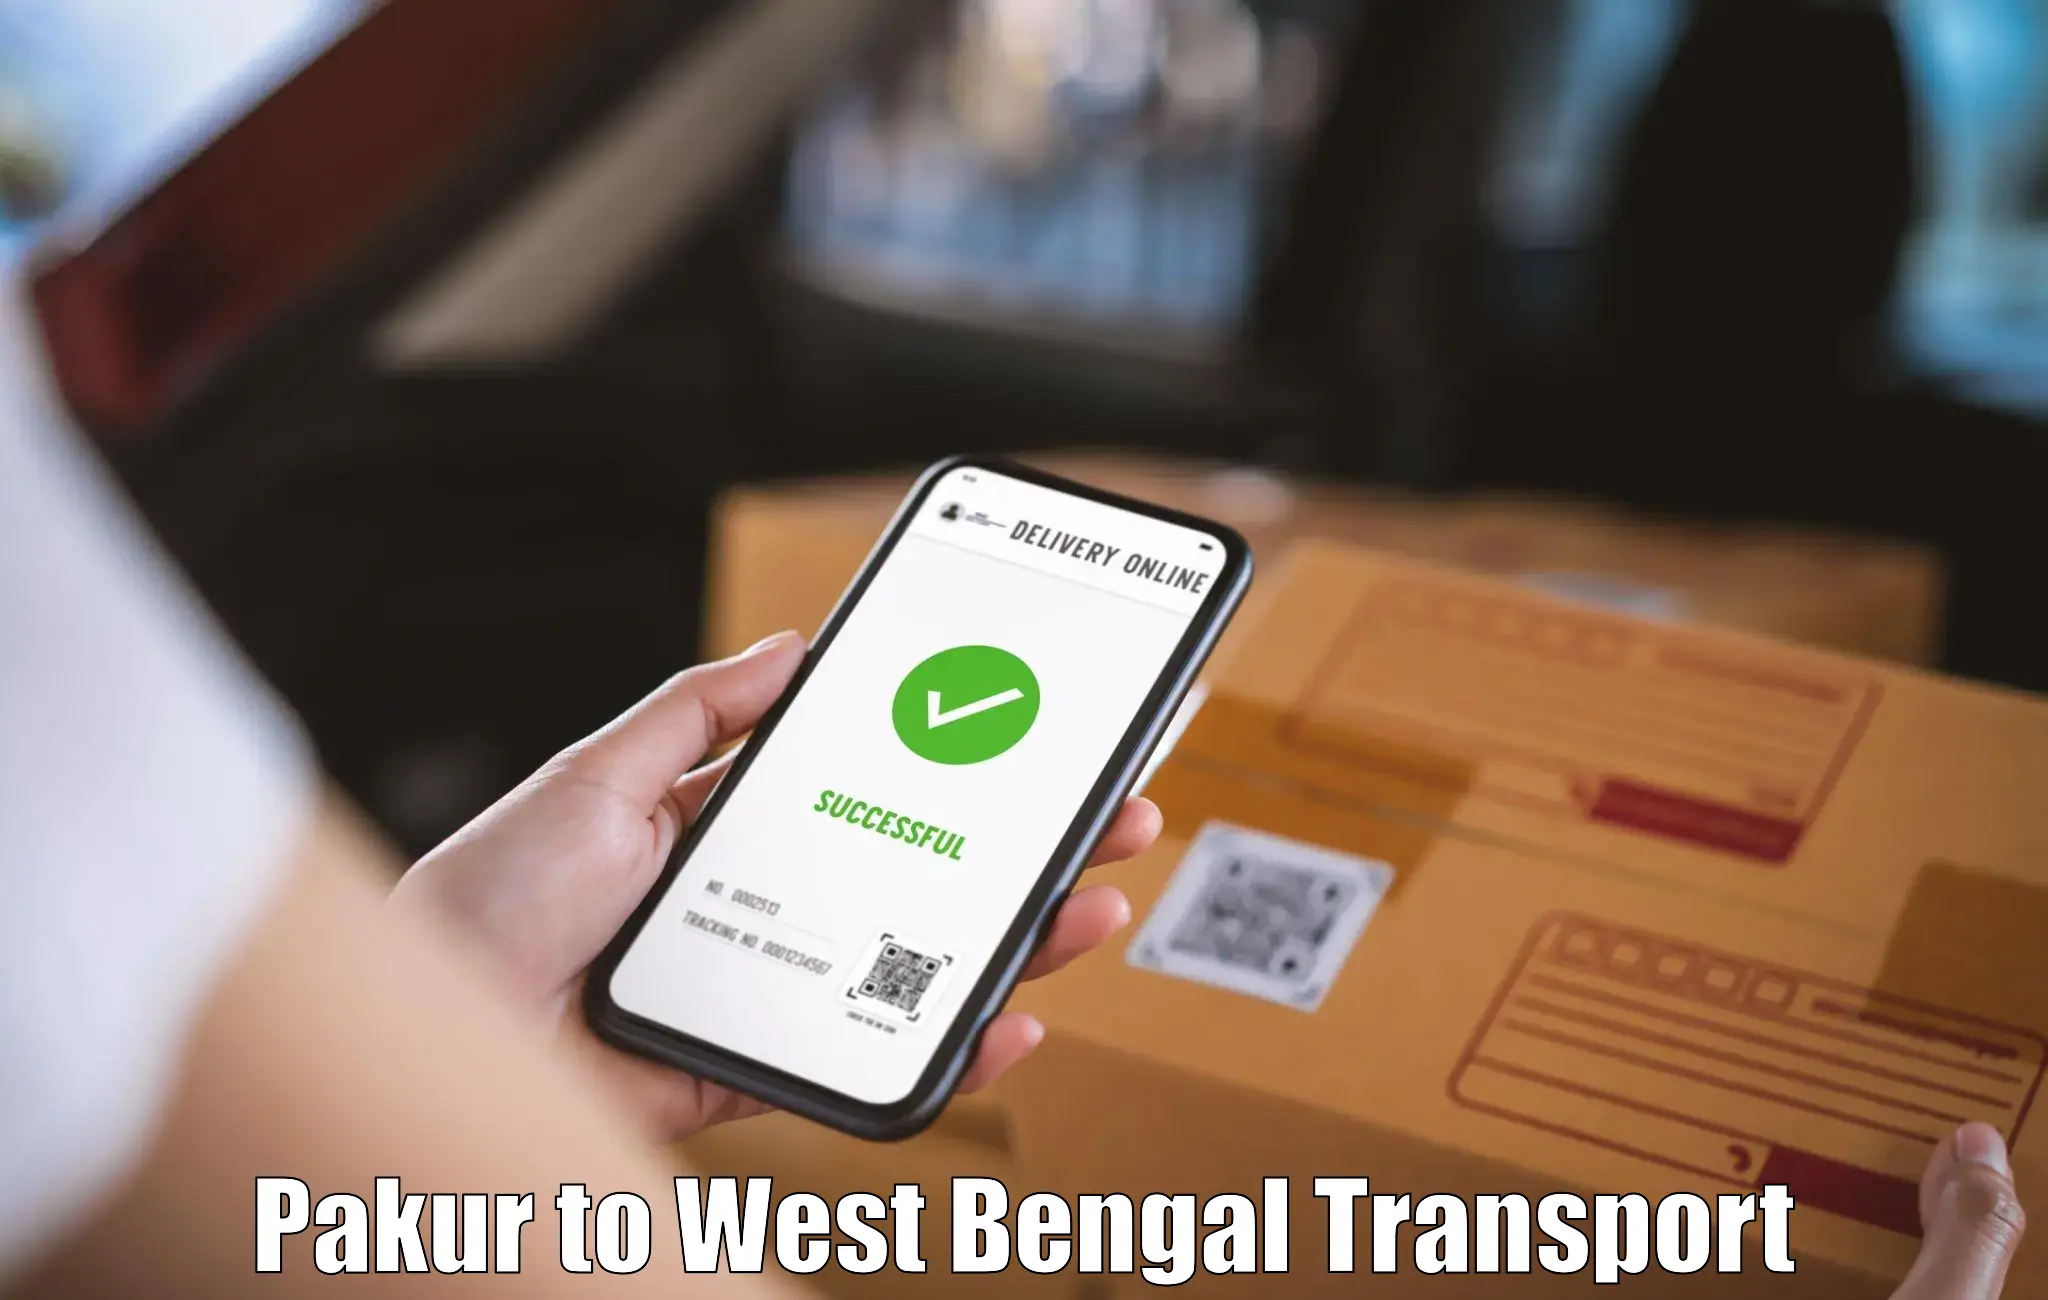 Goods delivery service Pakur to West Bengal